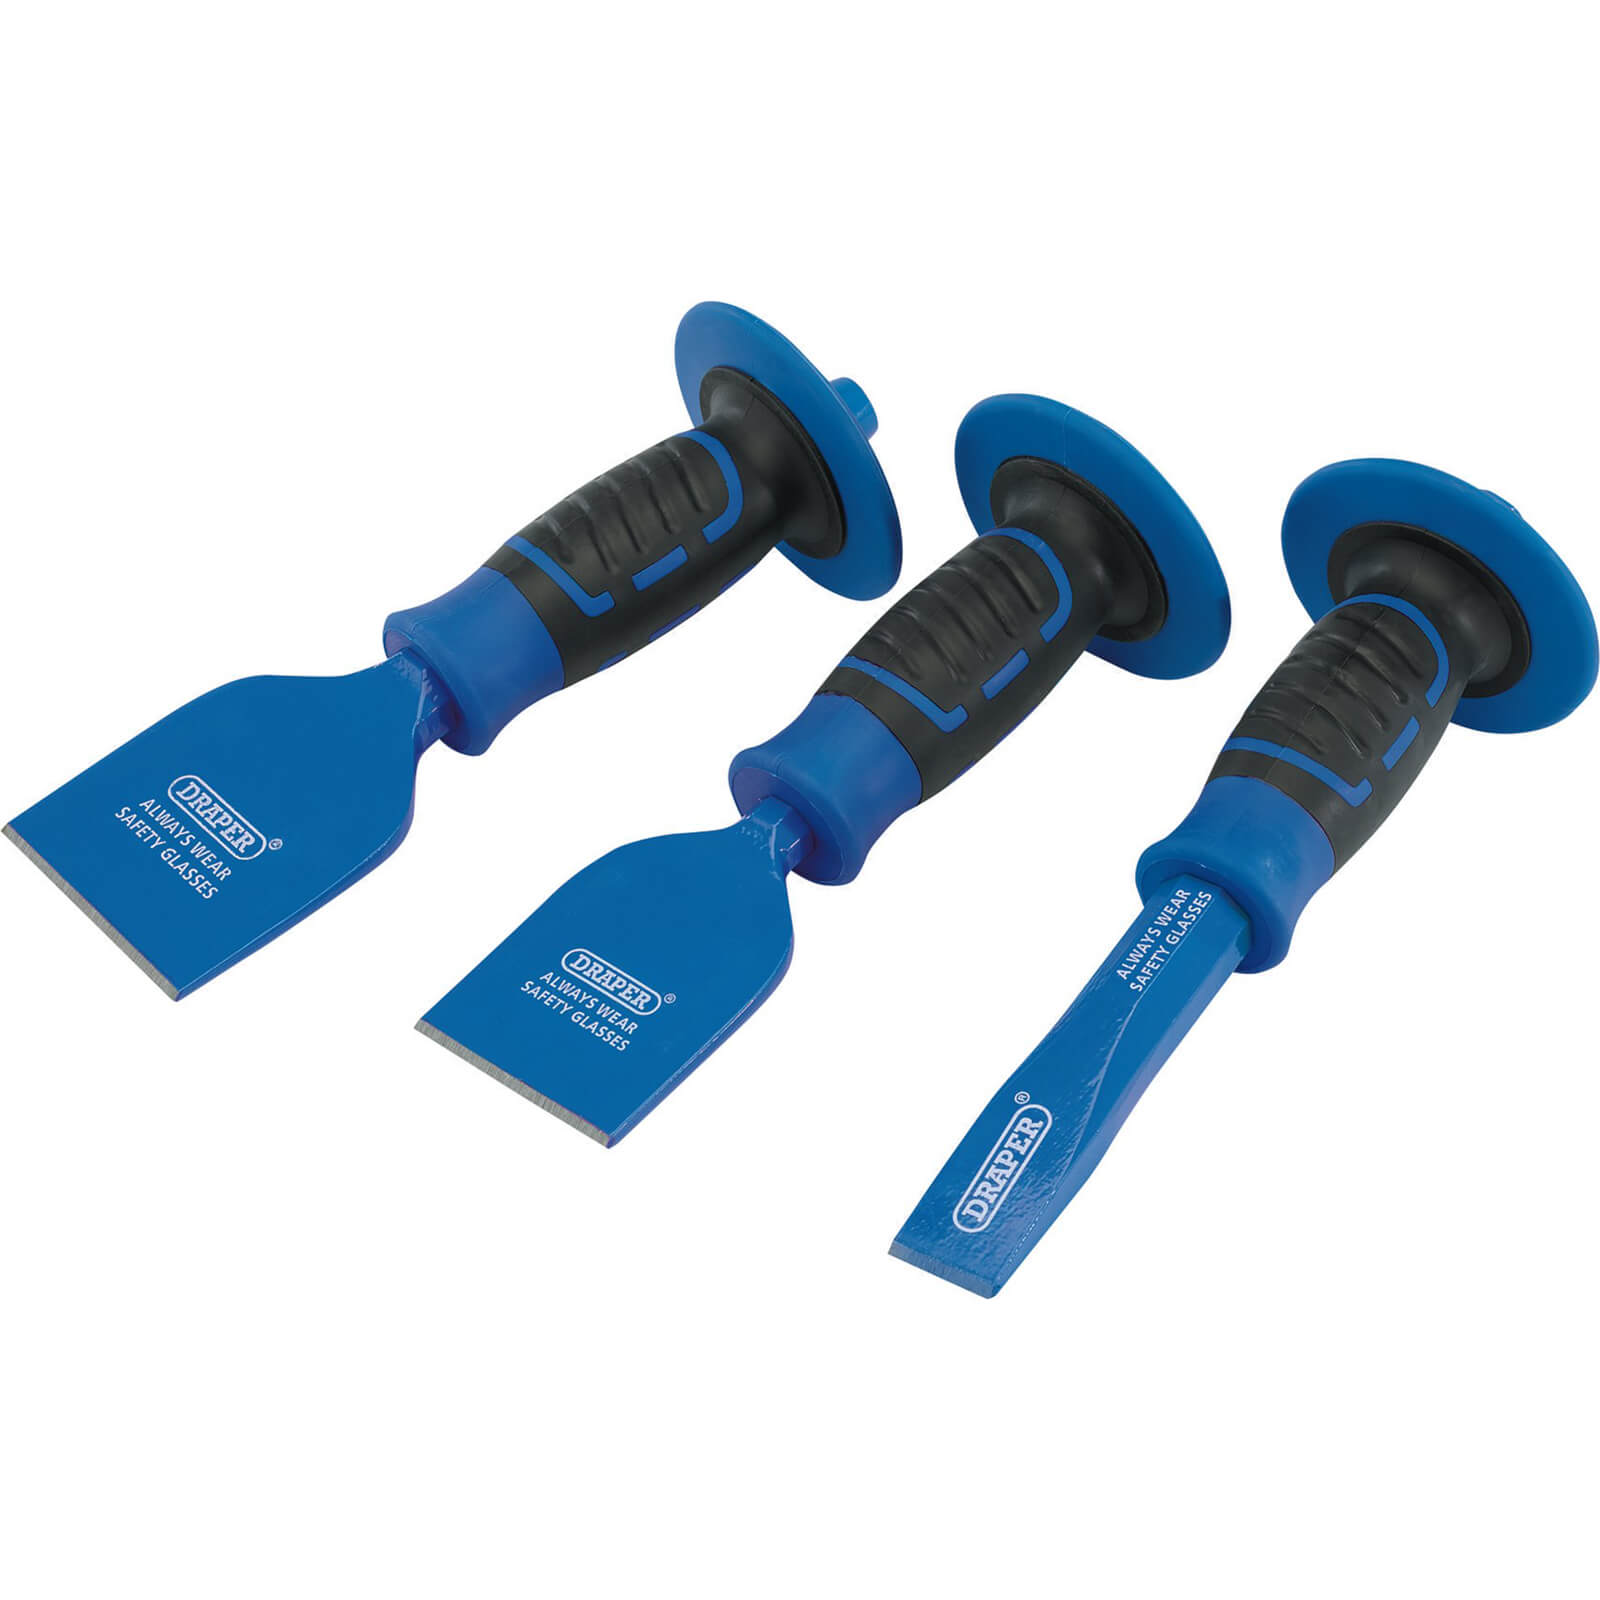 Image of Draper 3 Piece Bolster and Chisel Set